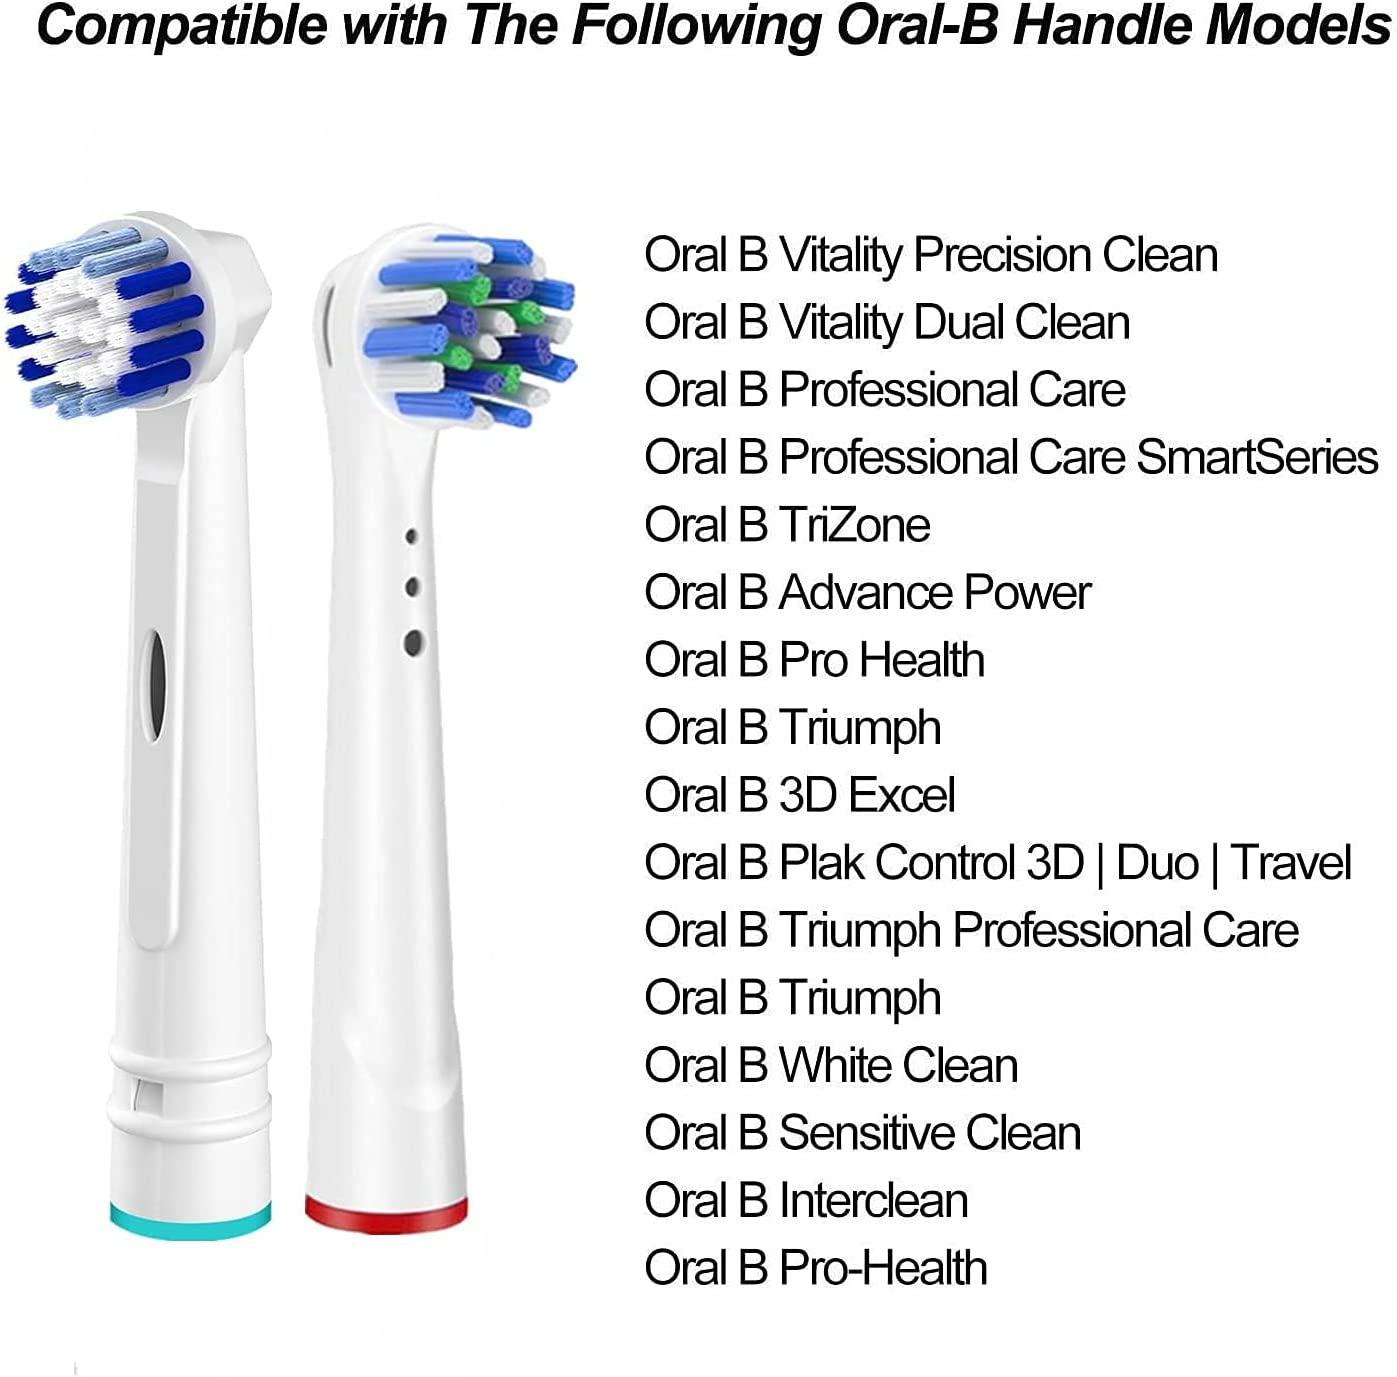 Replacement Heads Compatible with Oral B,8 Electric Toothbrush Heads Cross Action for Oral-b 7000/Pro 1000/9600/500/3000/8000 and More